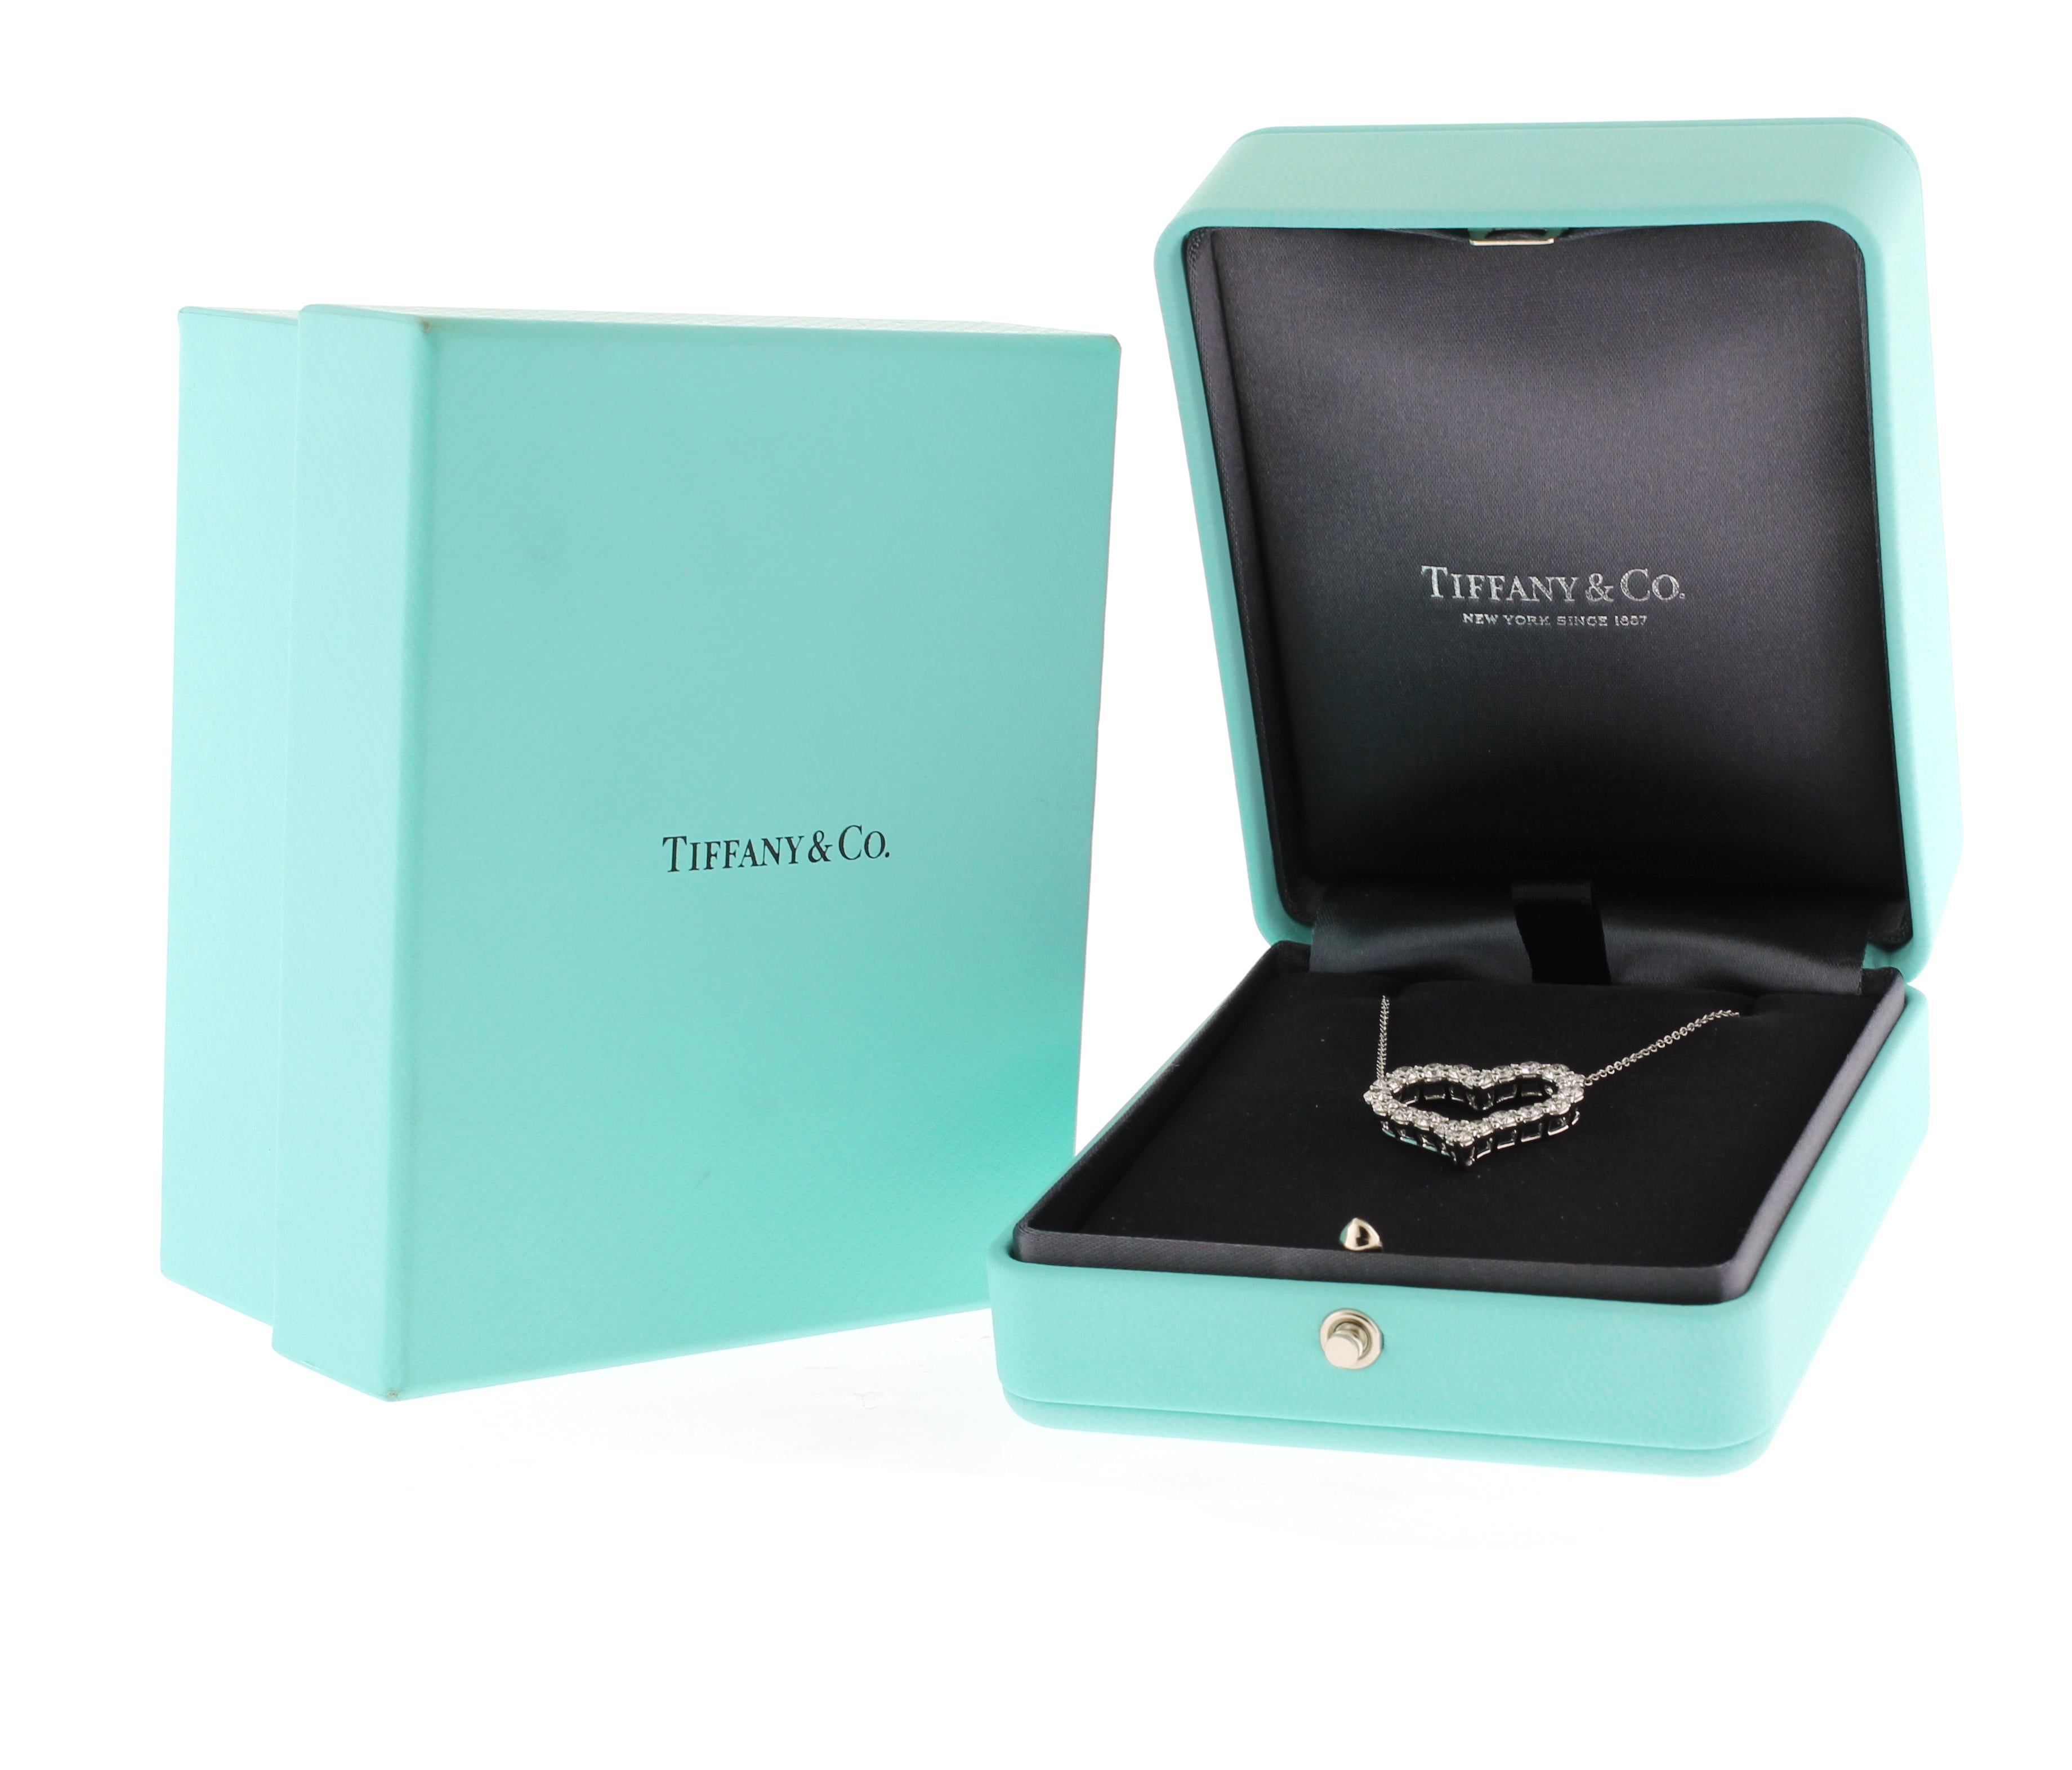 From Tiffany & Co., this is the large platinum heart pendant with 20 diamonds.
• Designer: Tiffany & Co.
• Metal: Platinum
• Circa: 2022
• Diamond: 20=1.96 carats
•  Length: 16 inch chain
• Packaging:  Original Tiffany Box
• Condition: Excellent

